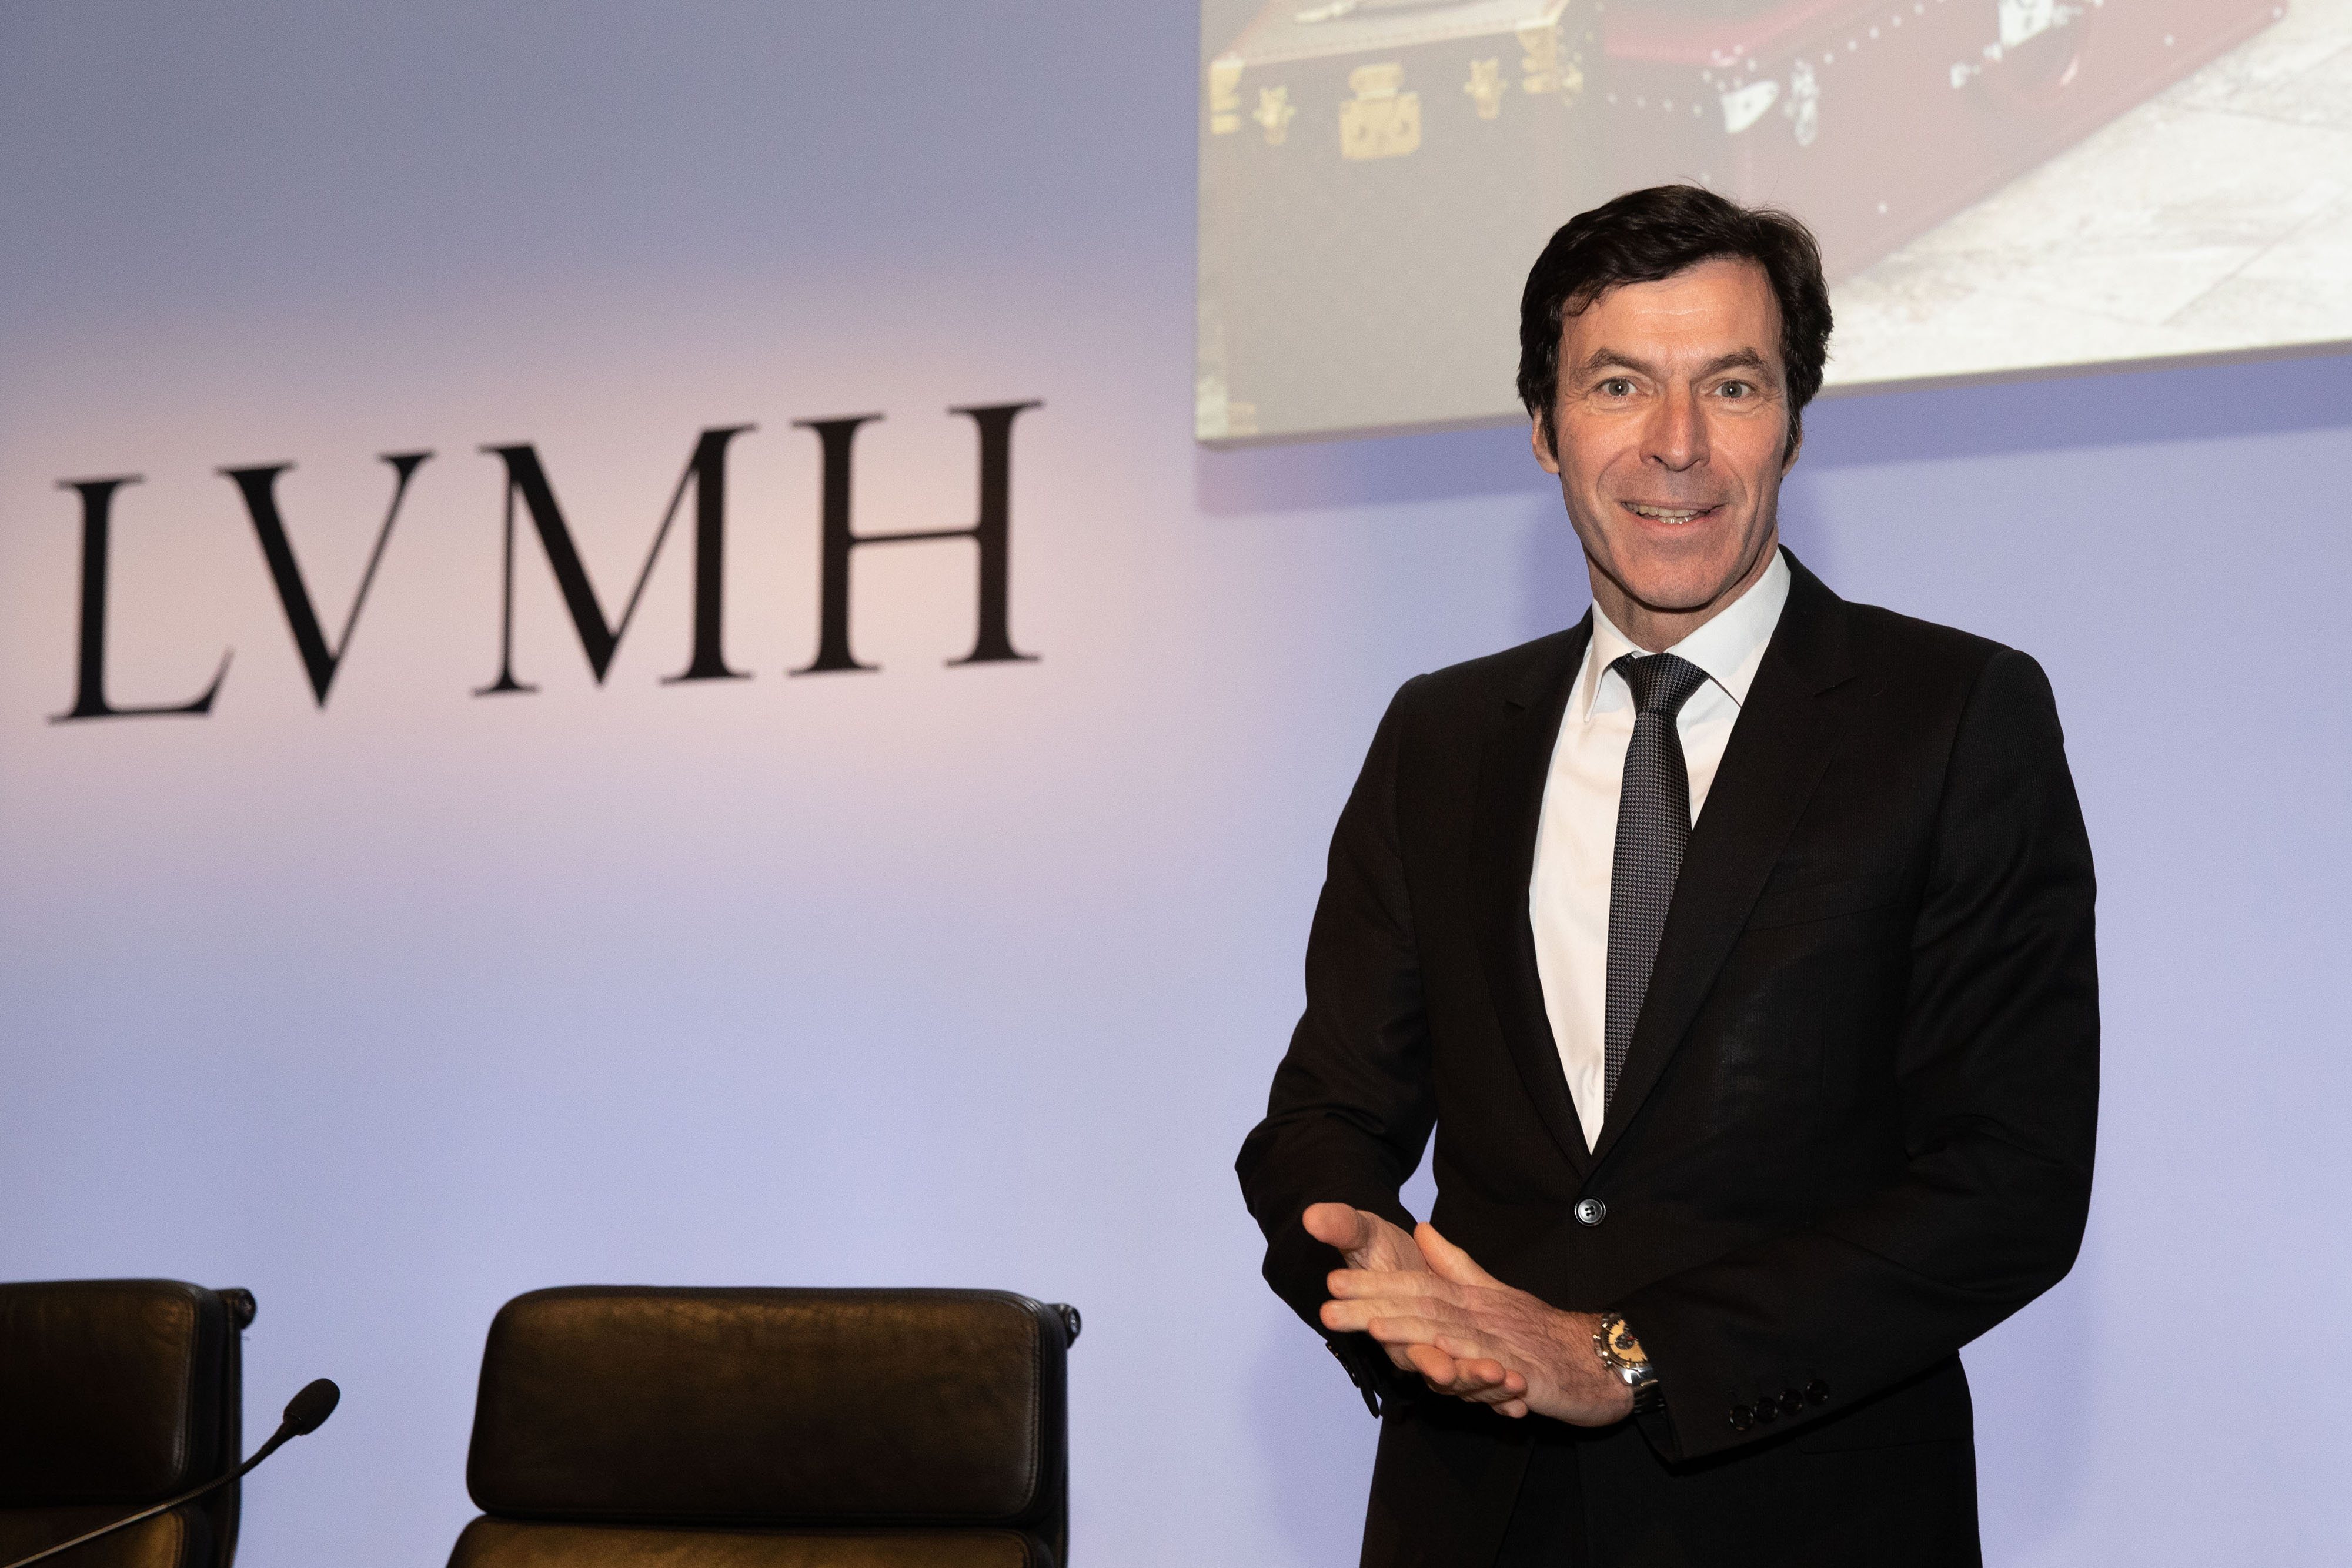 LVMH's Watch, Jewelry Sales Down 38% So Far This Year